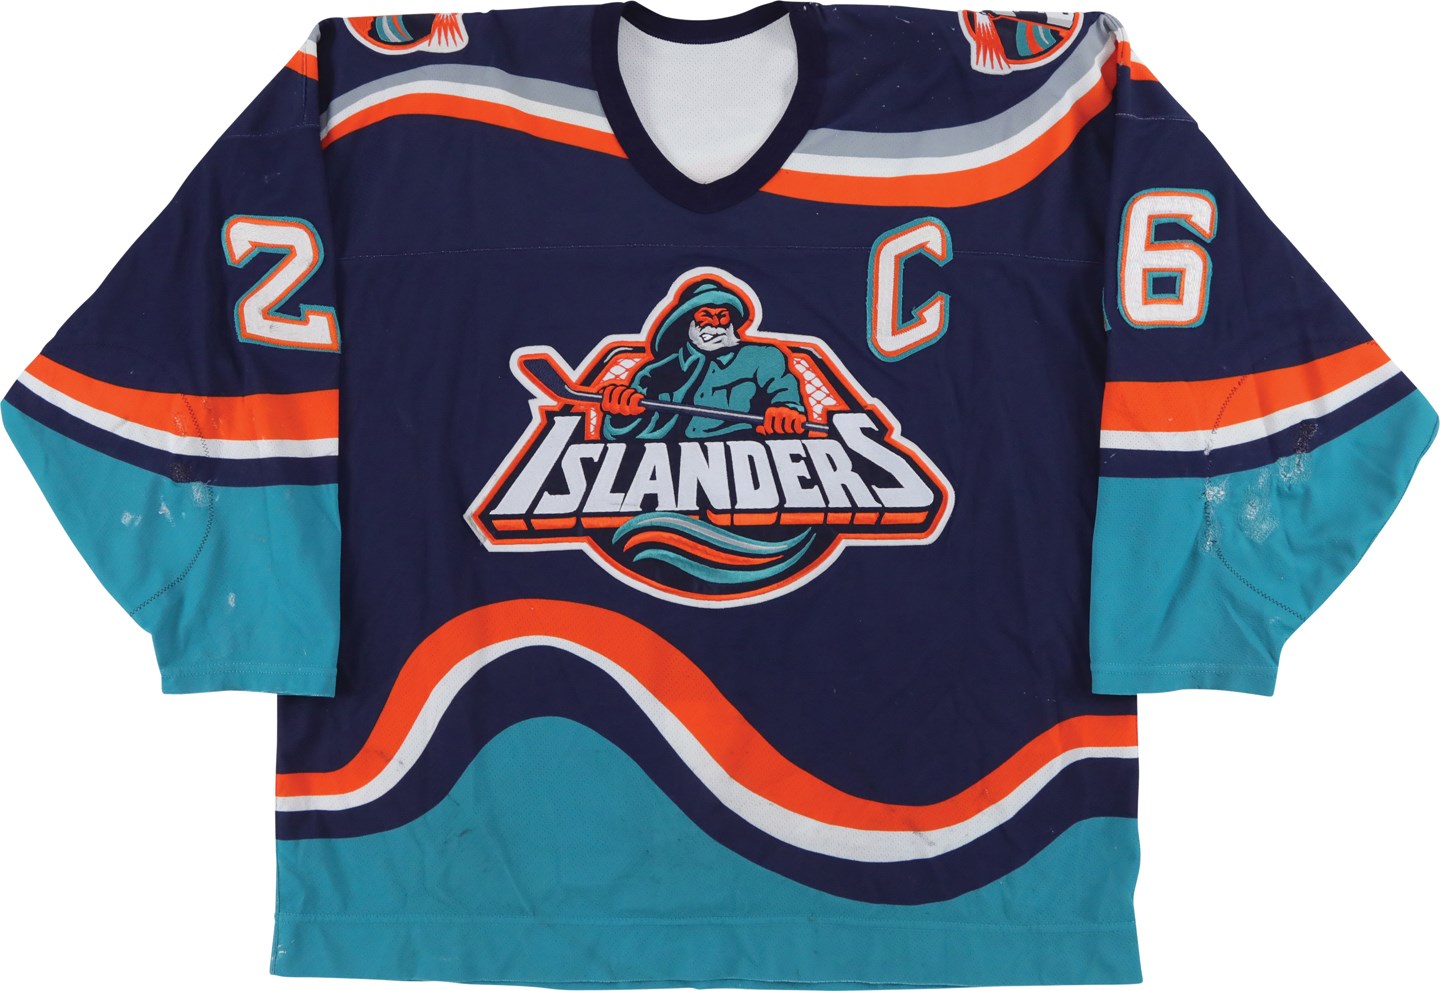 - 1995-96 Patrick Flatley New York Islanders "Fisherman" Game Worn Jersey - First Year Style and Matched to Second Game of Season! (Photo-Matched)